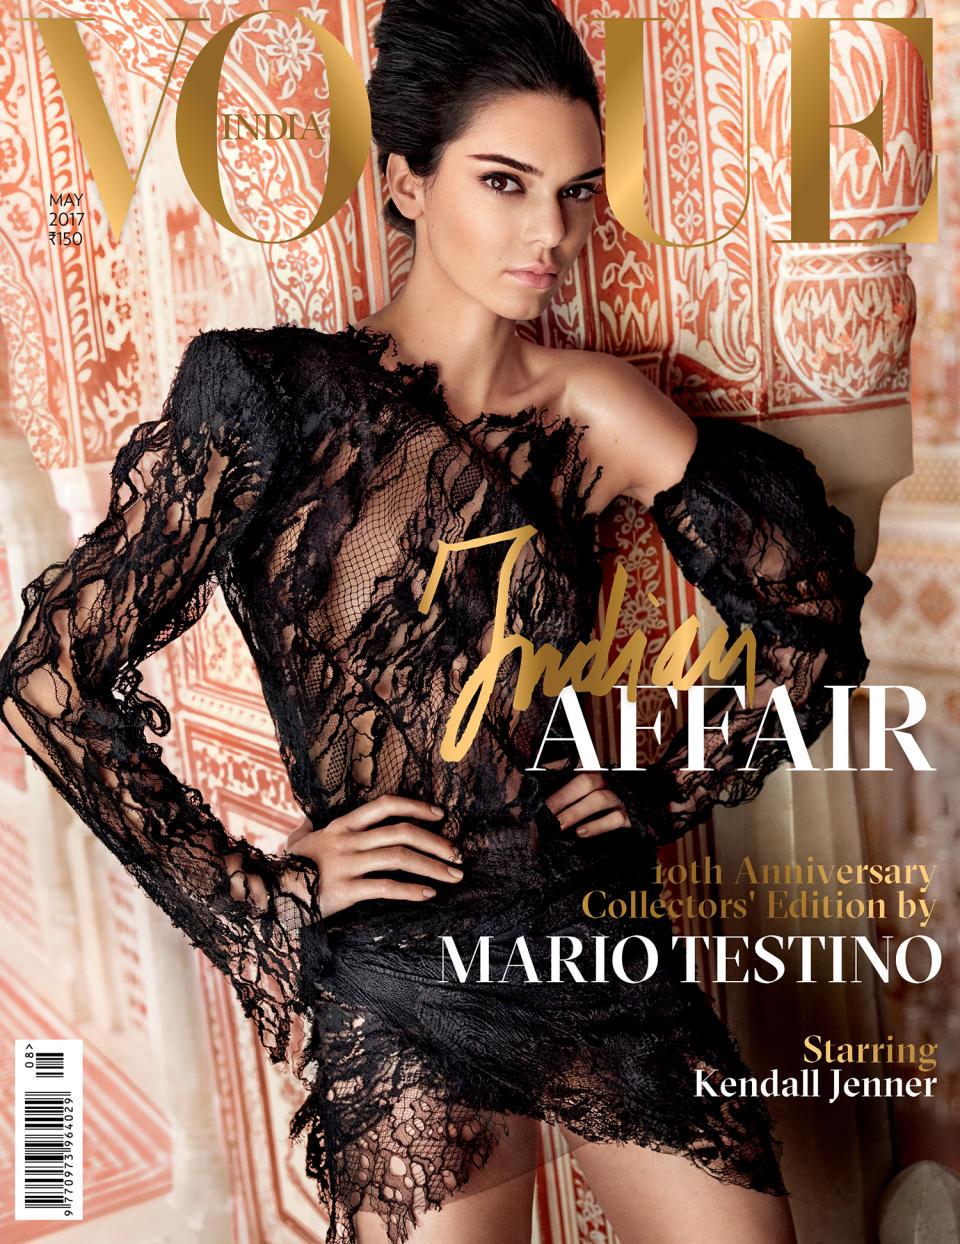 Mario Testino Takes Over Vogue India, With Kendall Jenner